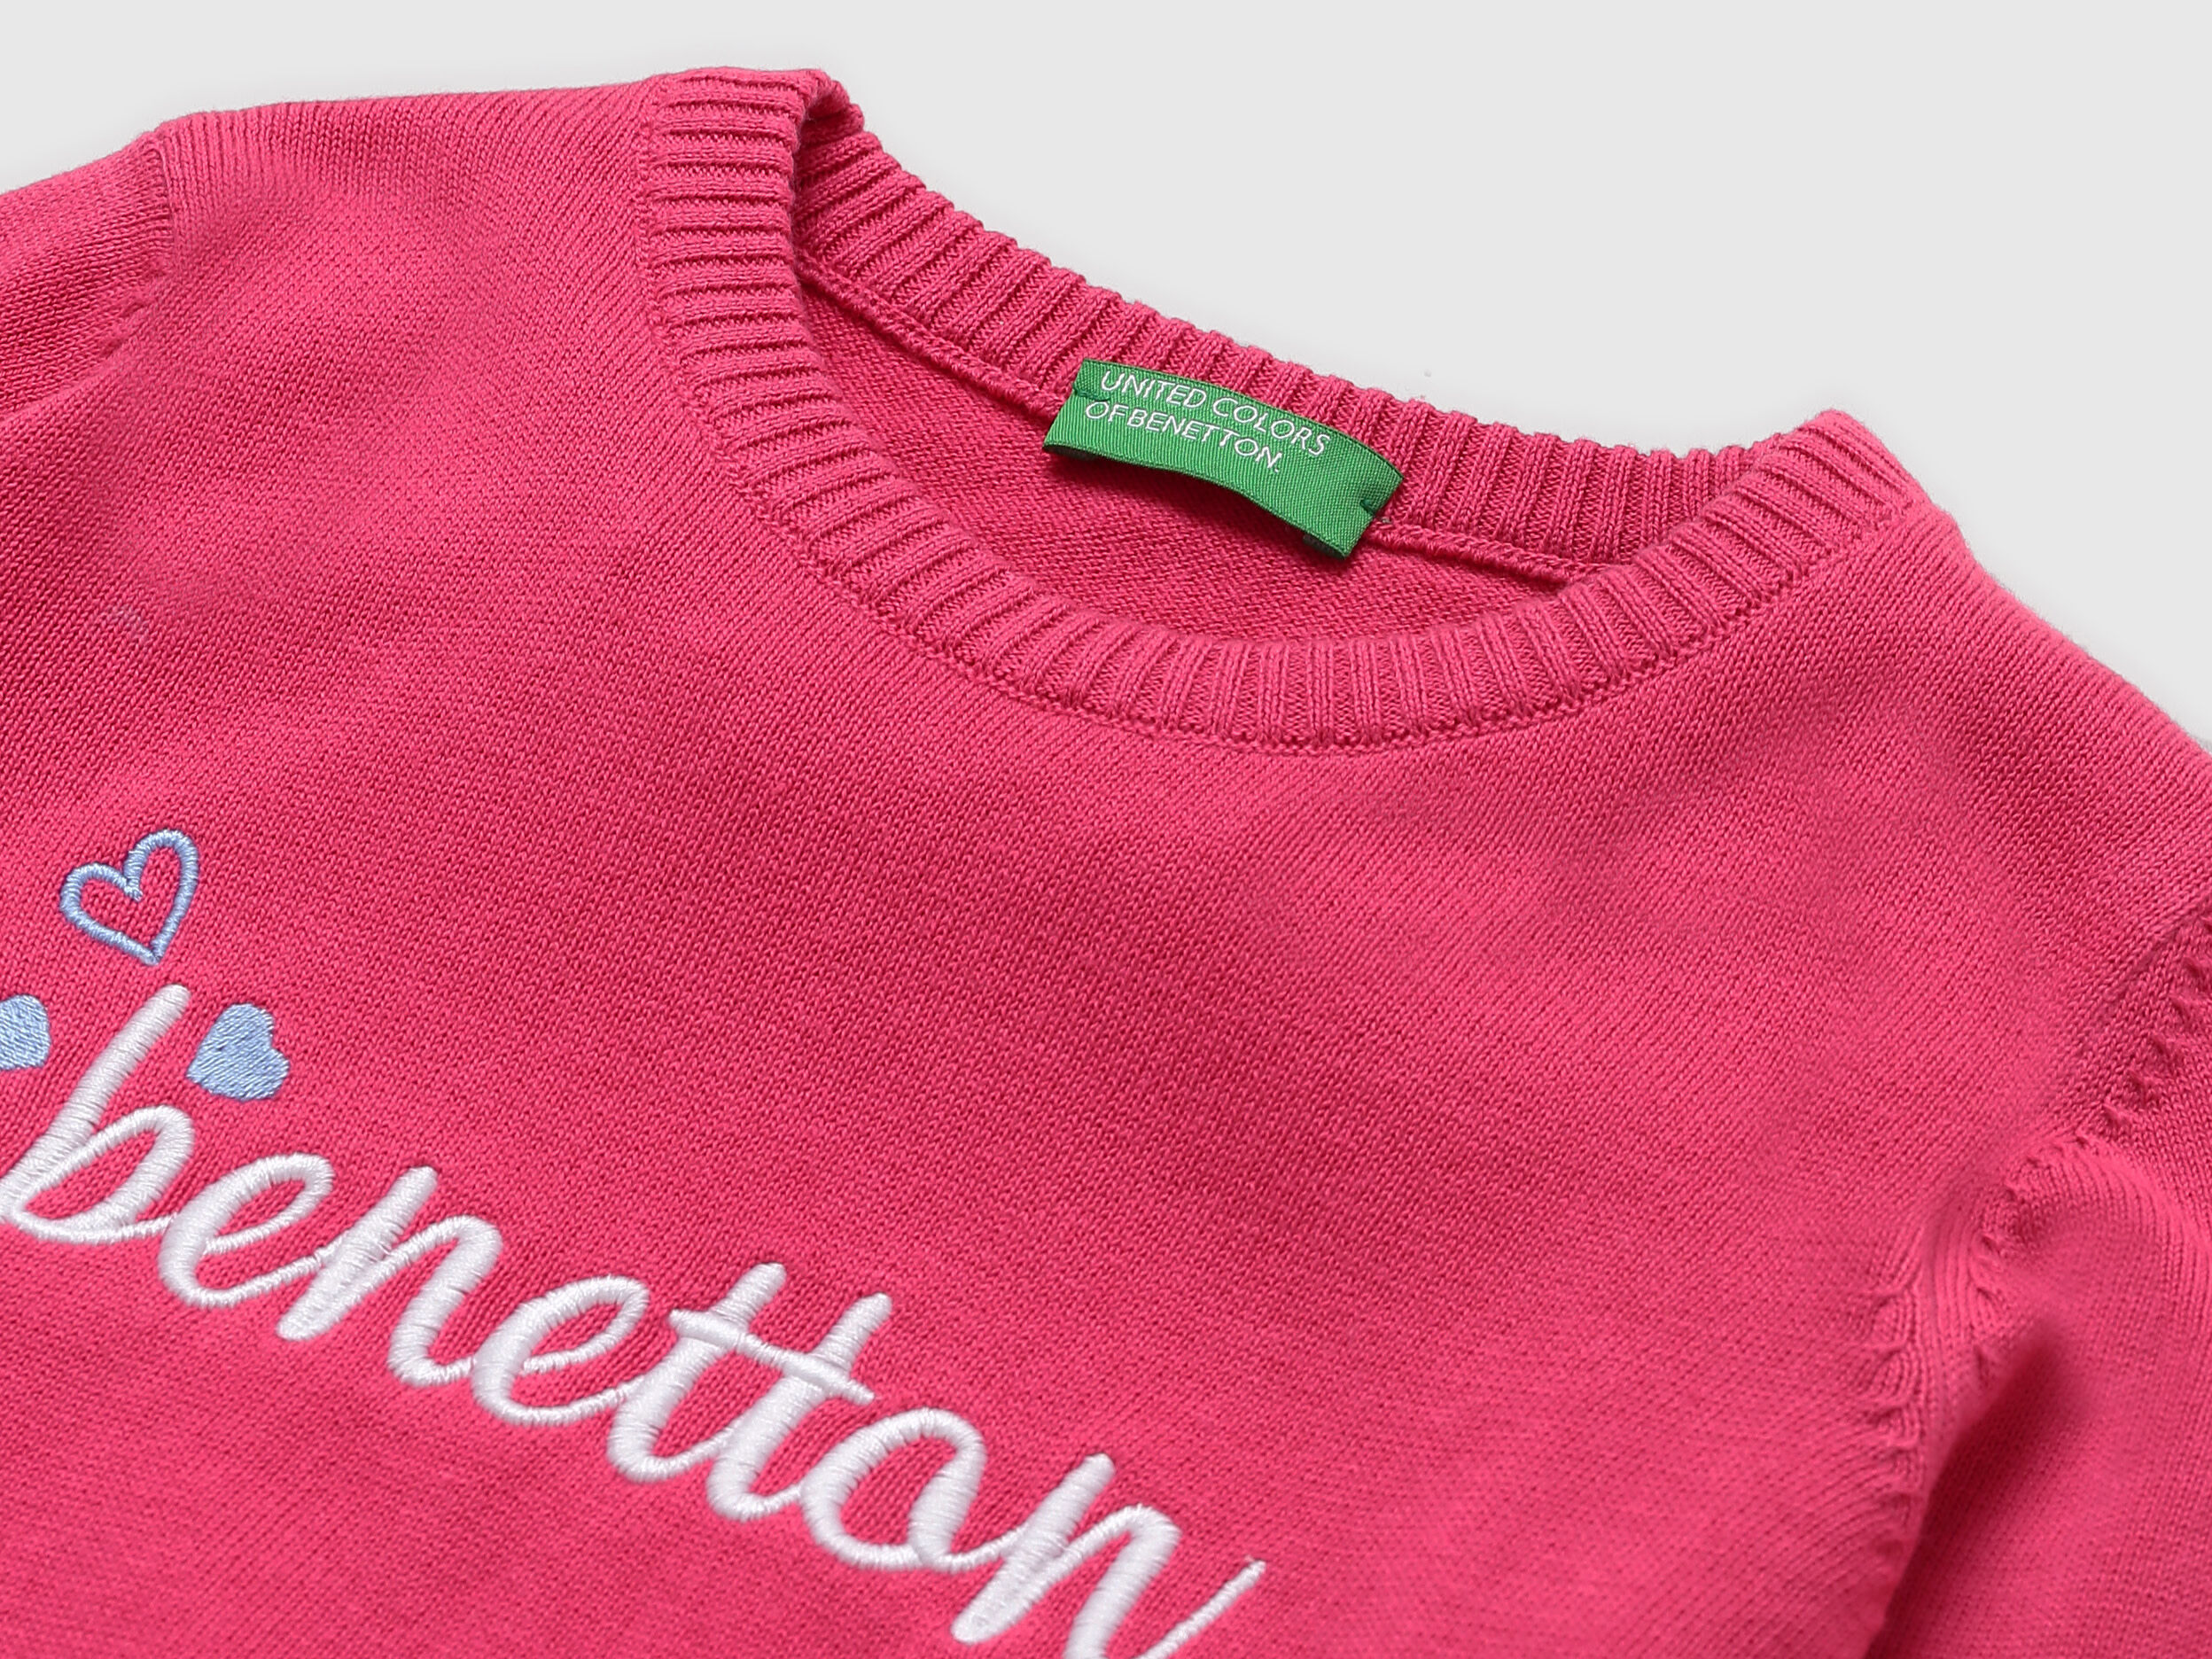 Benetton United Colors of Benetton Girls Pink  Cotton Jumper Dress  Size 8-9 Years  Round 